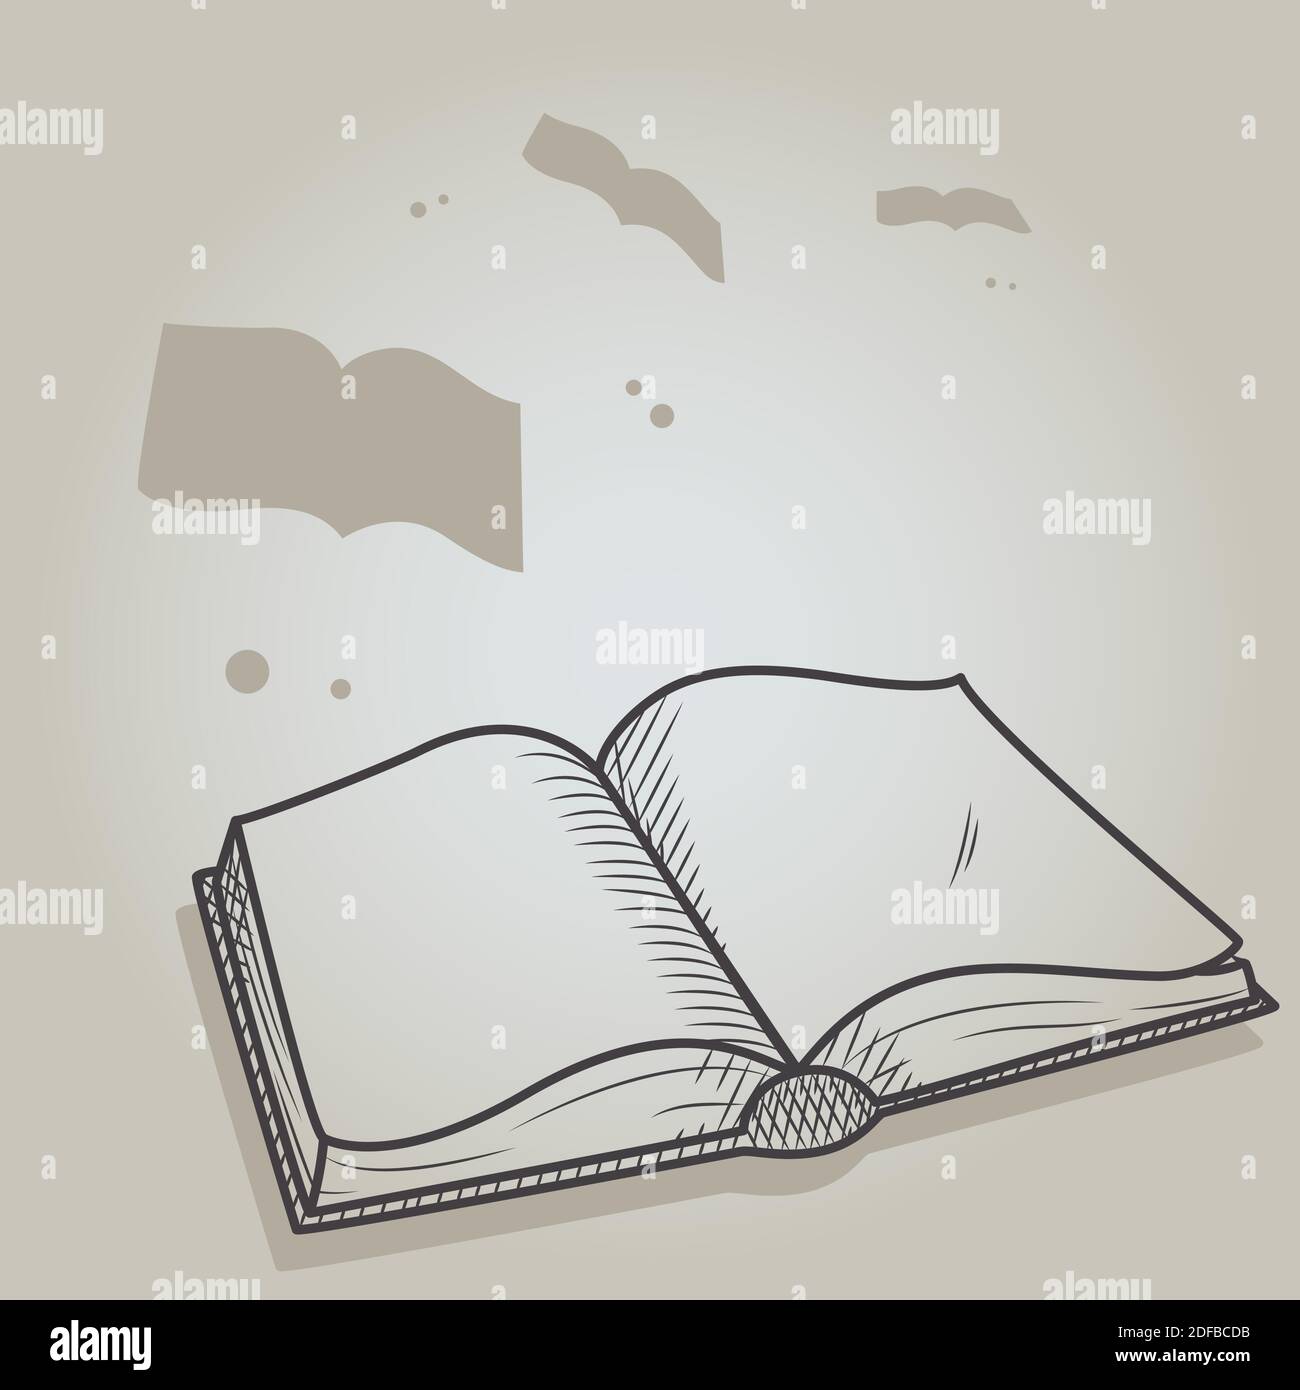 How To Draw A Open Book Pictures